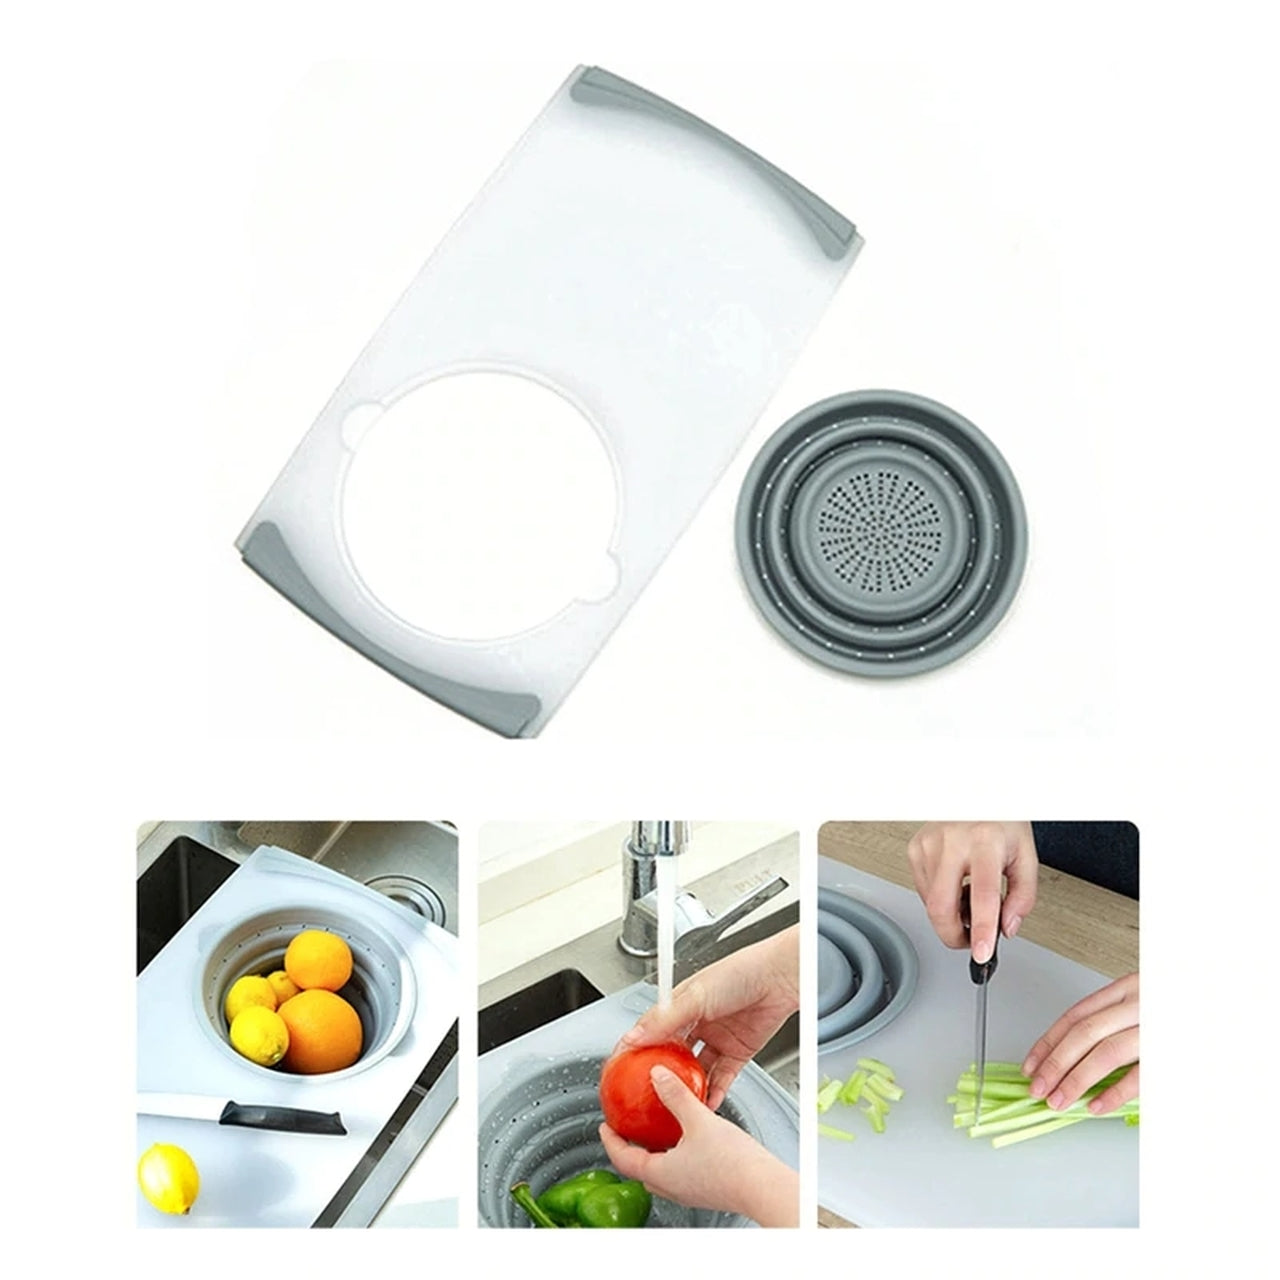 Cutting Board with Colander for Kitchen, 3-in-1 Plastic Chopping Board with Removable Collapsible Colander,for Cut Vegetable, Drain, Food Tray